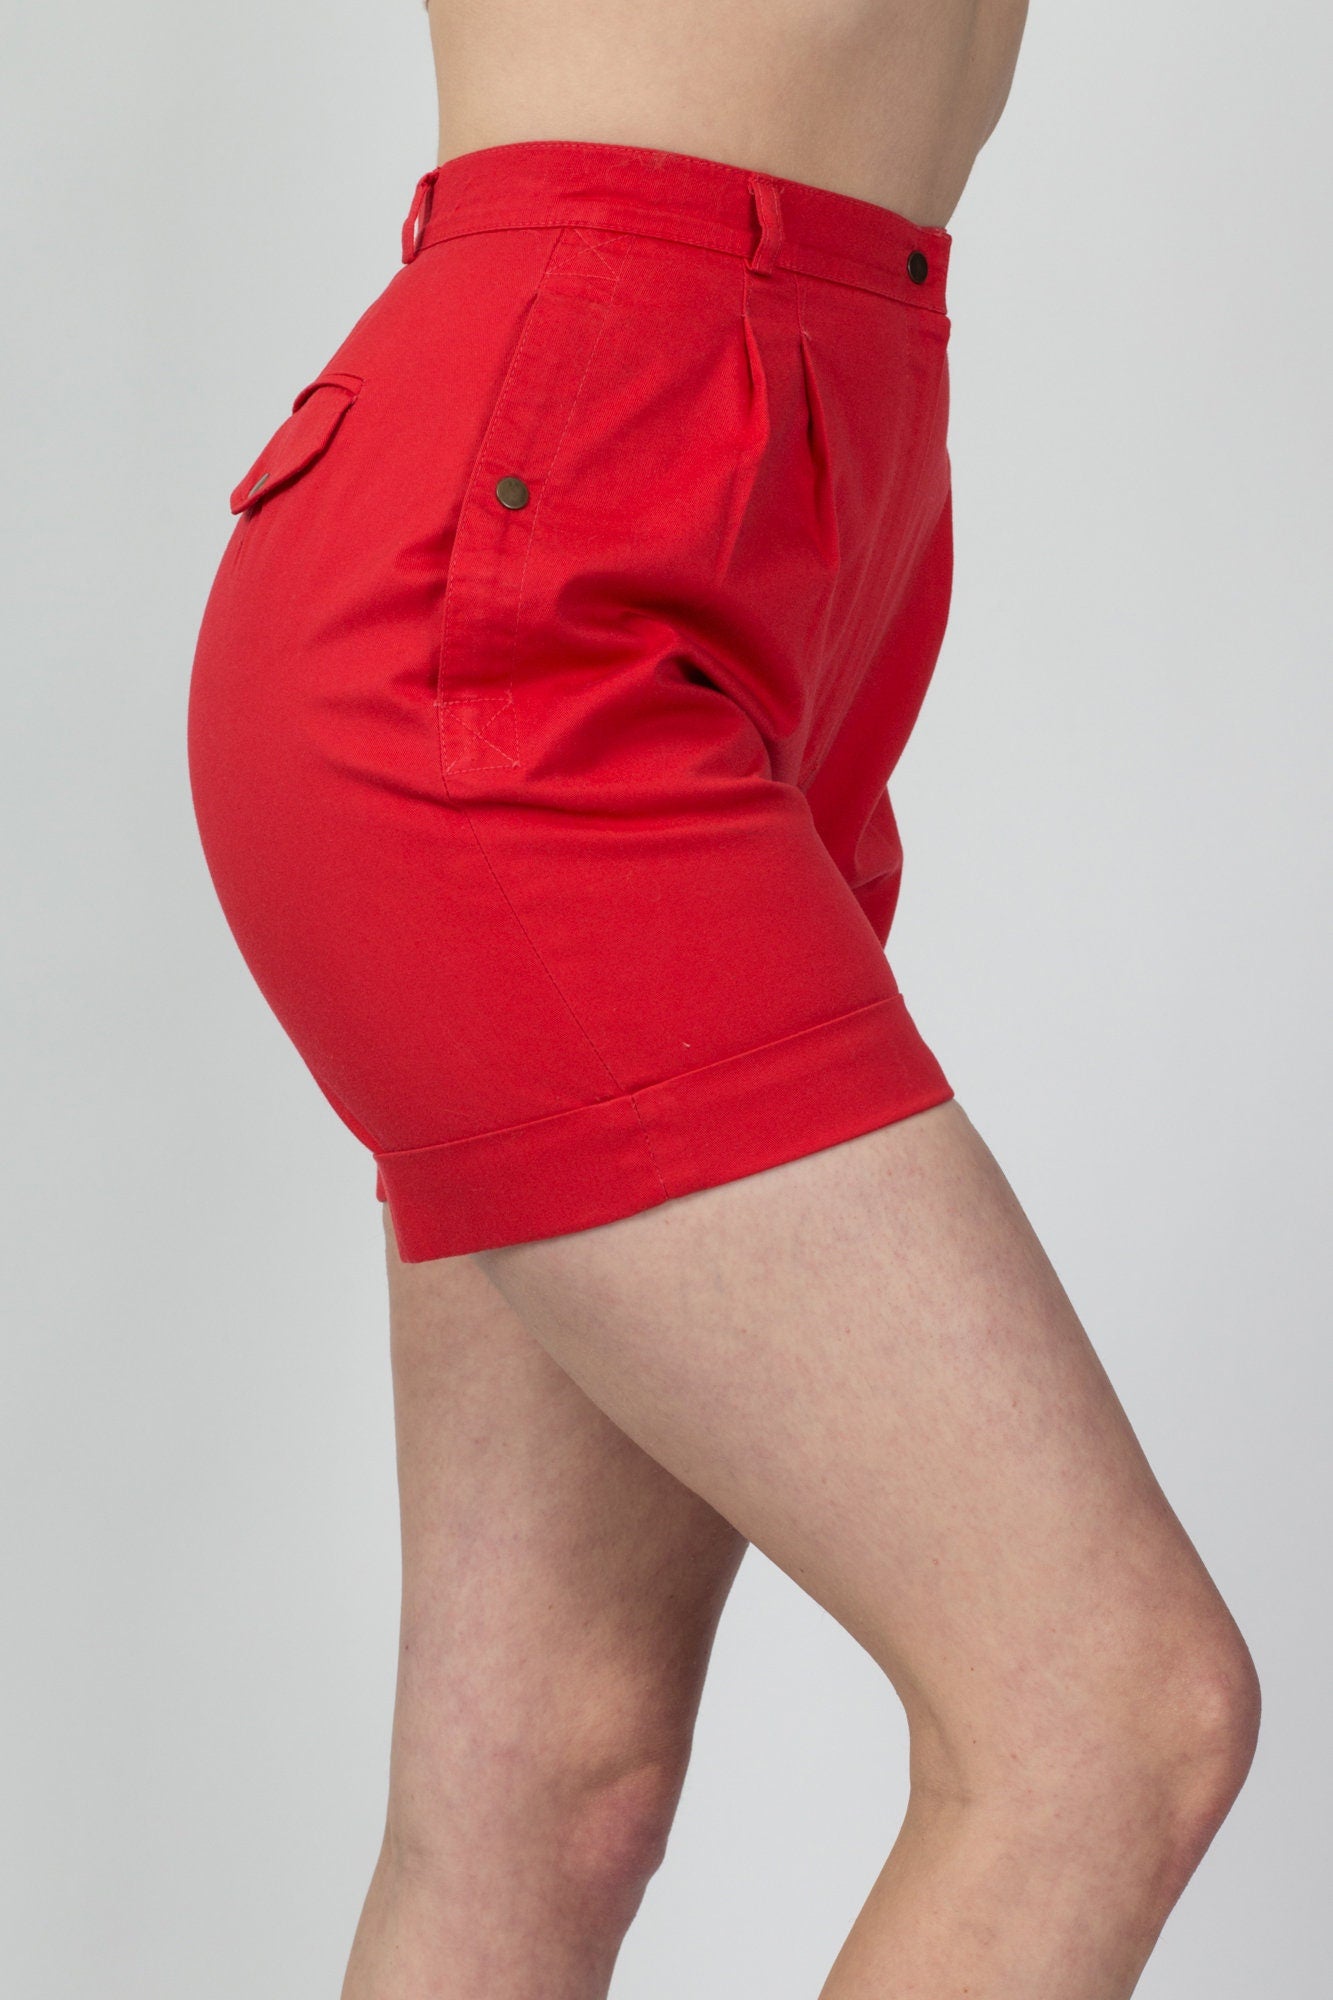 70s Bright Red High Waist Shorts - Extra Small, 25.25" 